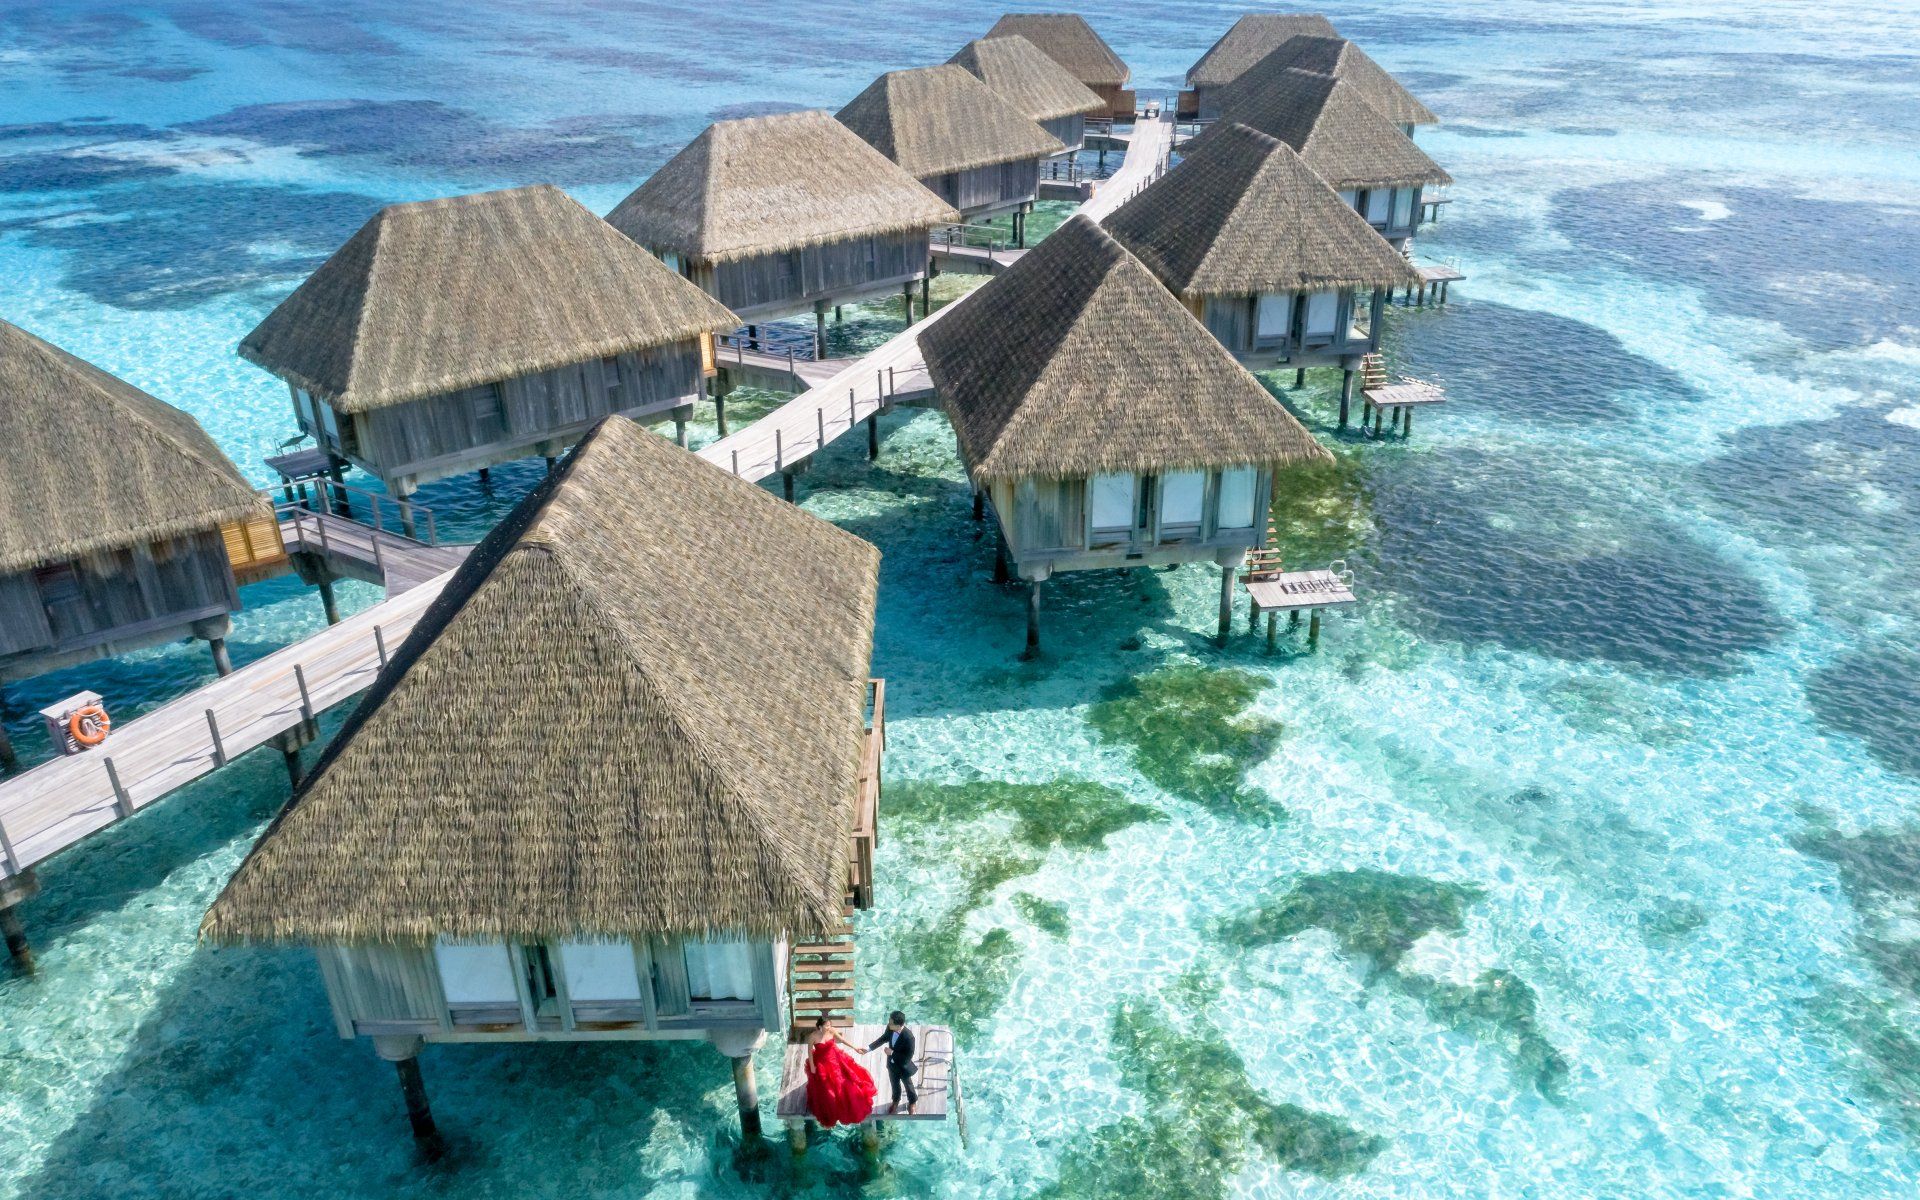 An aerial view of a row of thatched huts in the middle of the ocean.